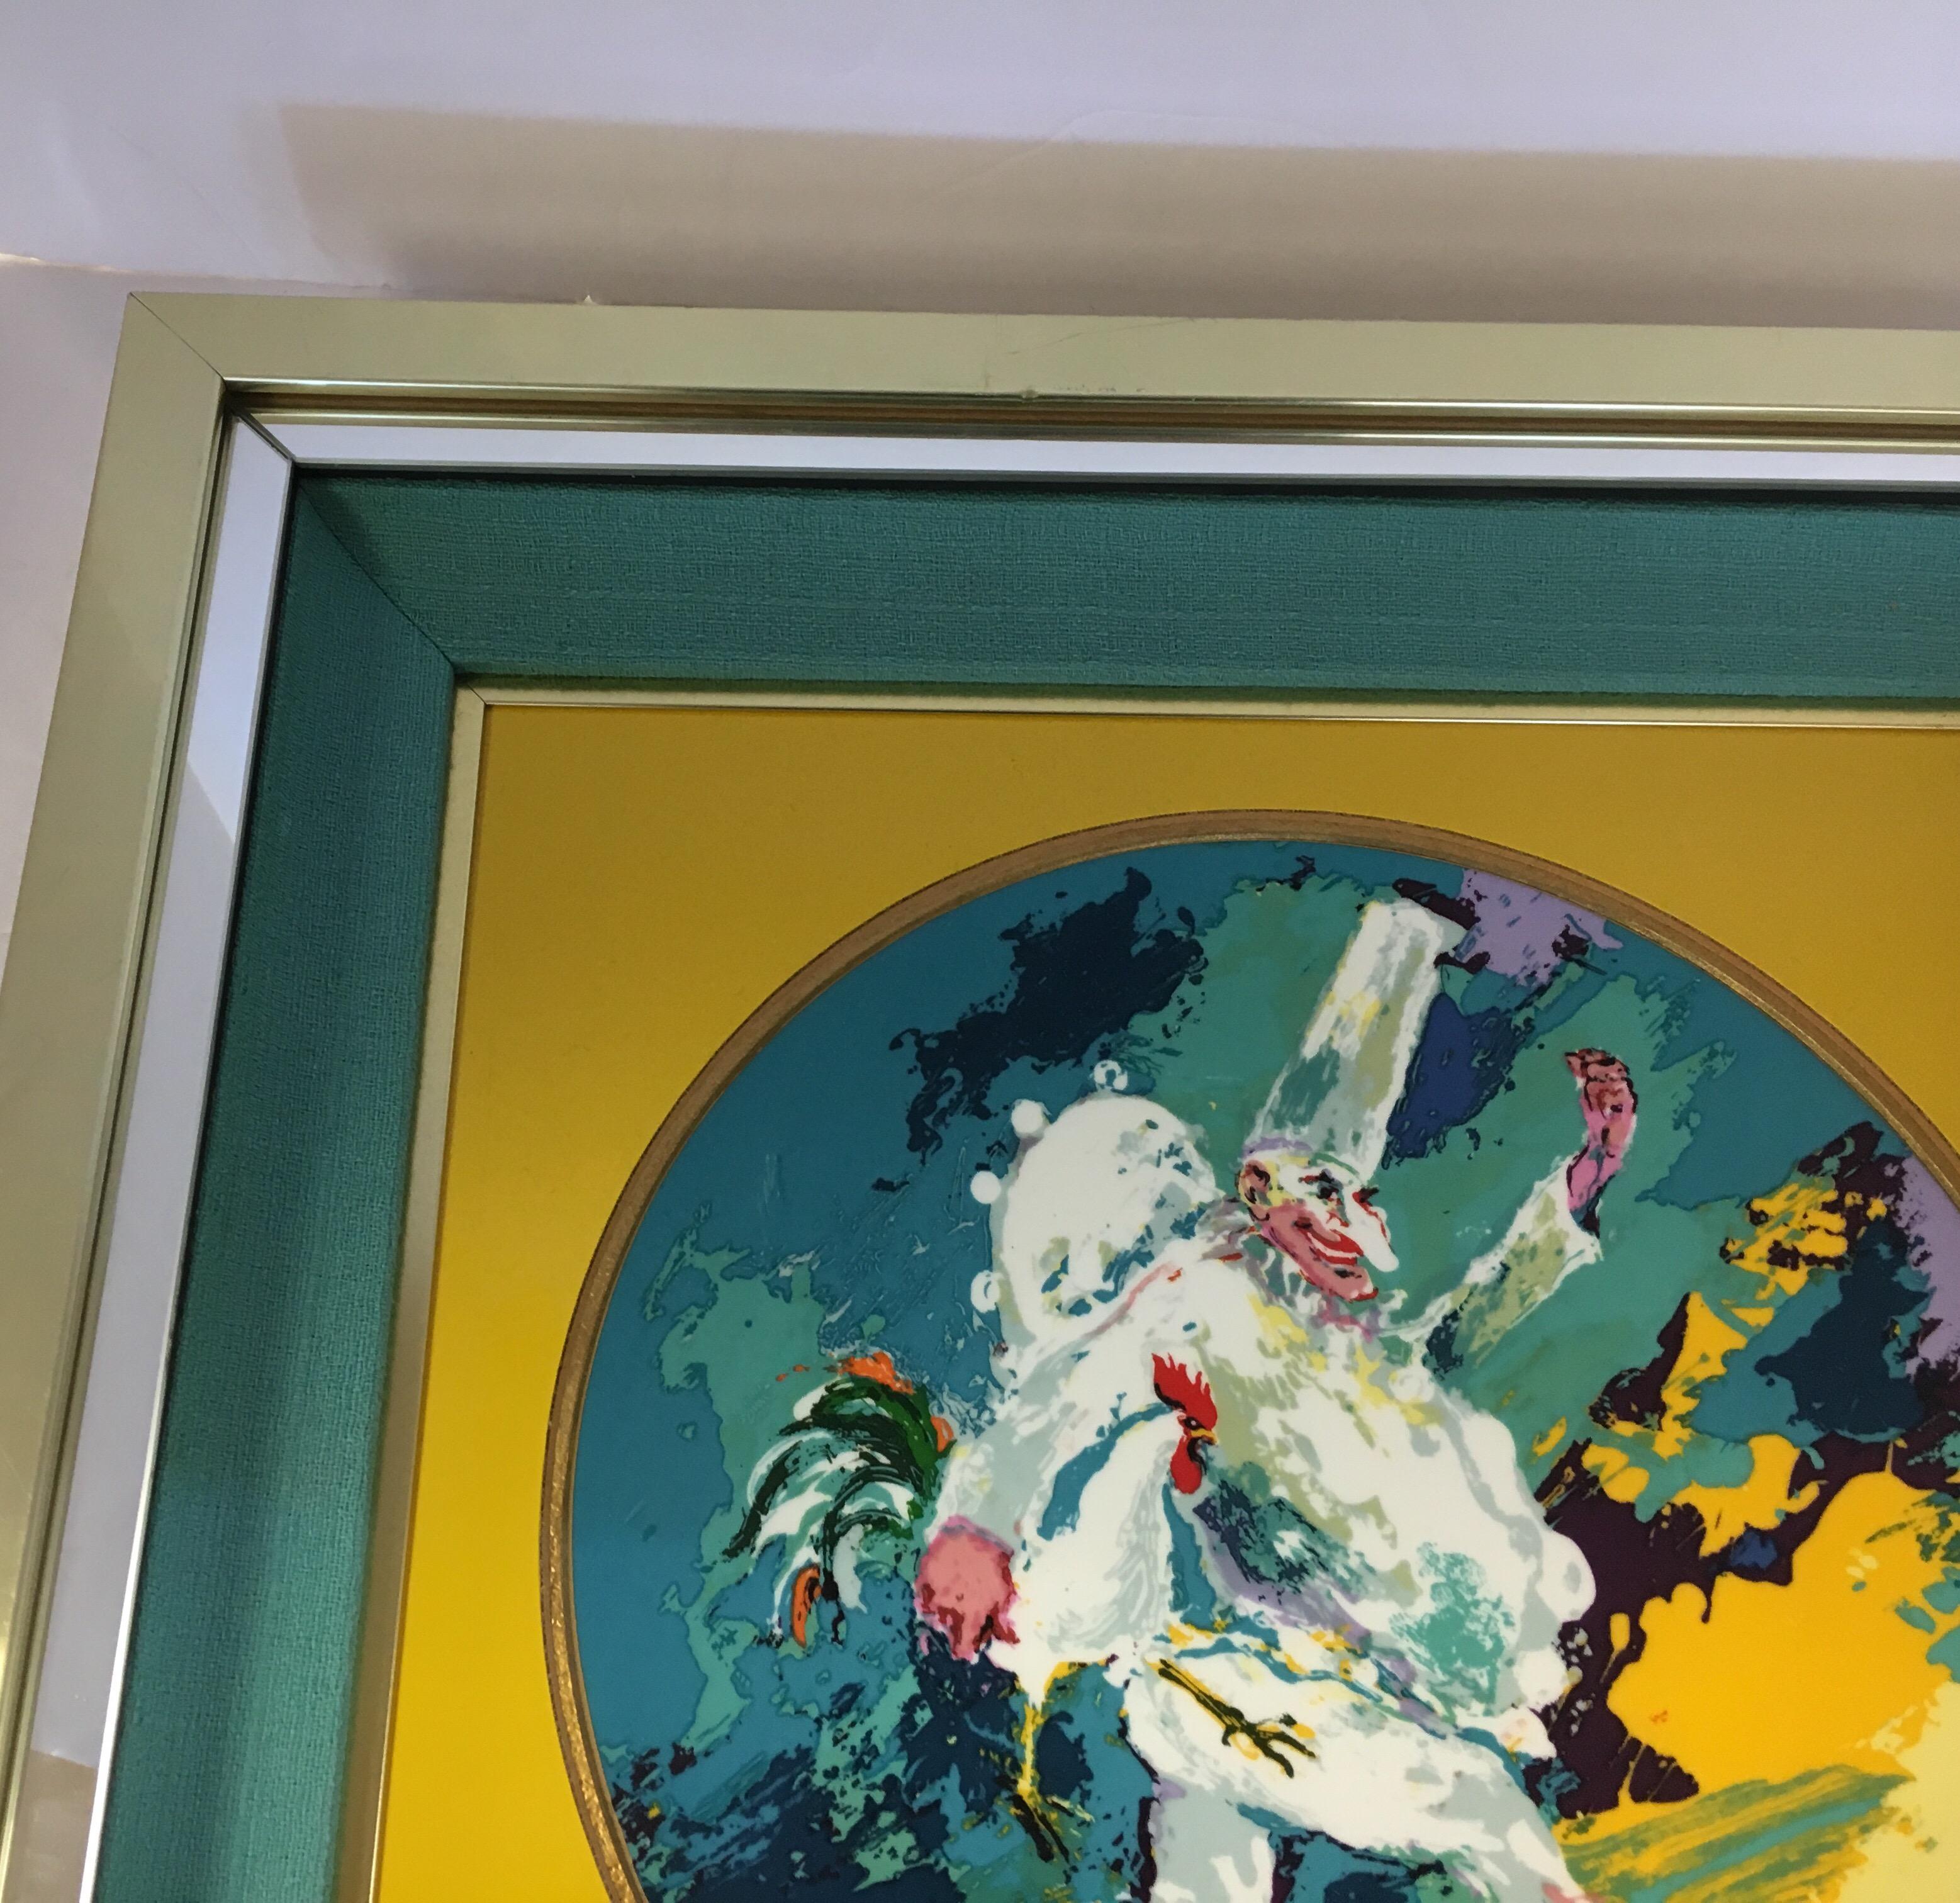 Leroy Neiman Limited Edition Royal Doulton Punchinello 1978 Framed Artwork Plate 2